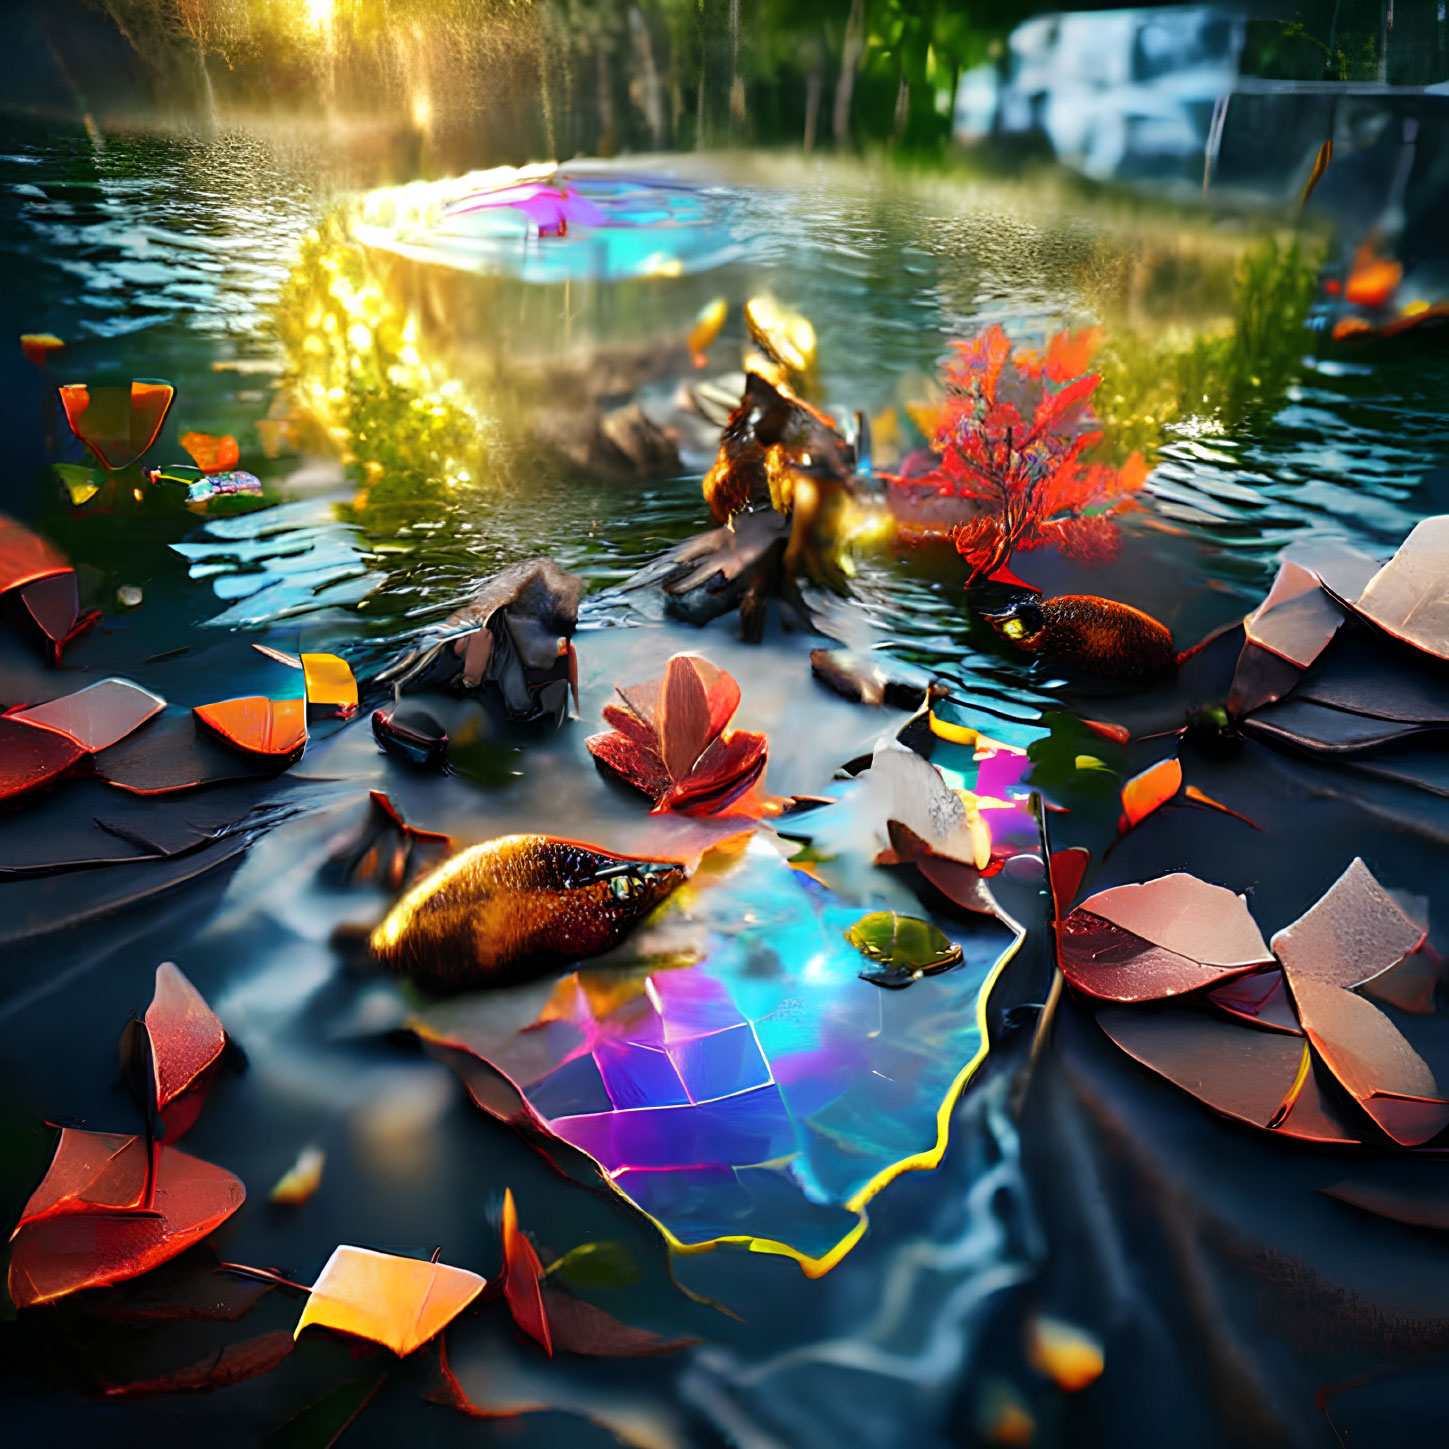 Colorful autumn leaves and fish in glowing pond scene